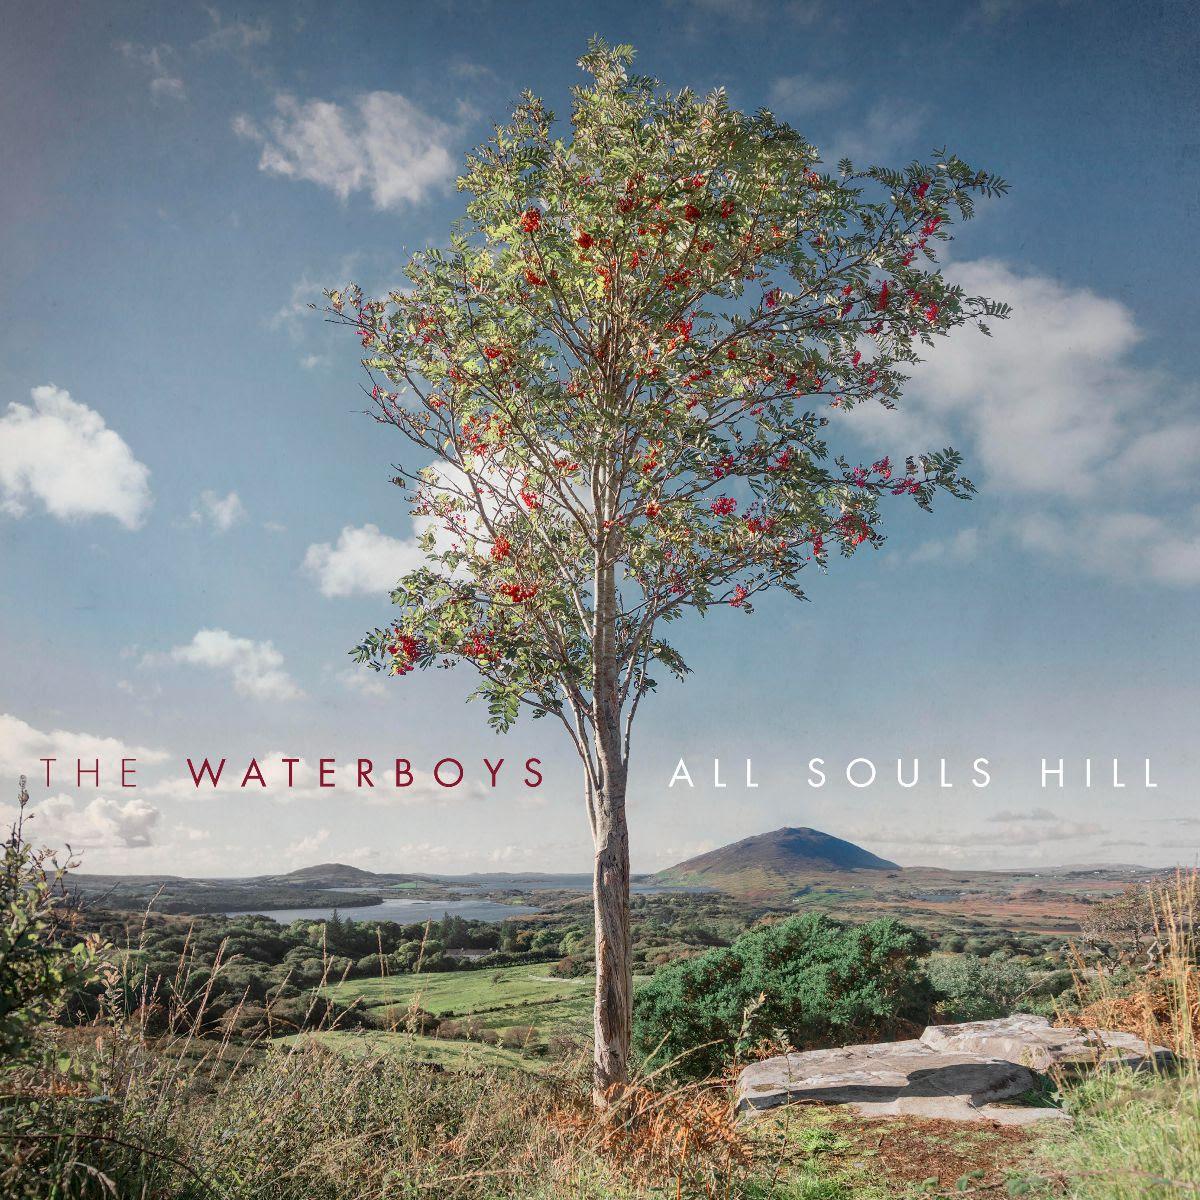 The Waterboys announce brand new record ‘All Souls Hill’ & reveal swipe at Trump in new track ‘The Liar’